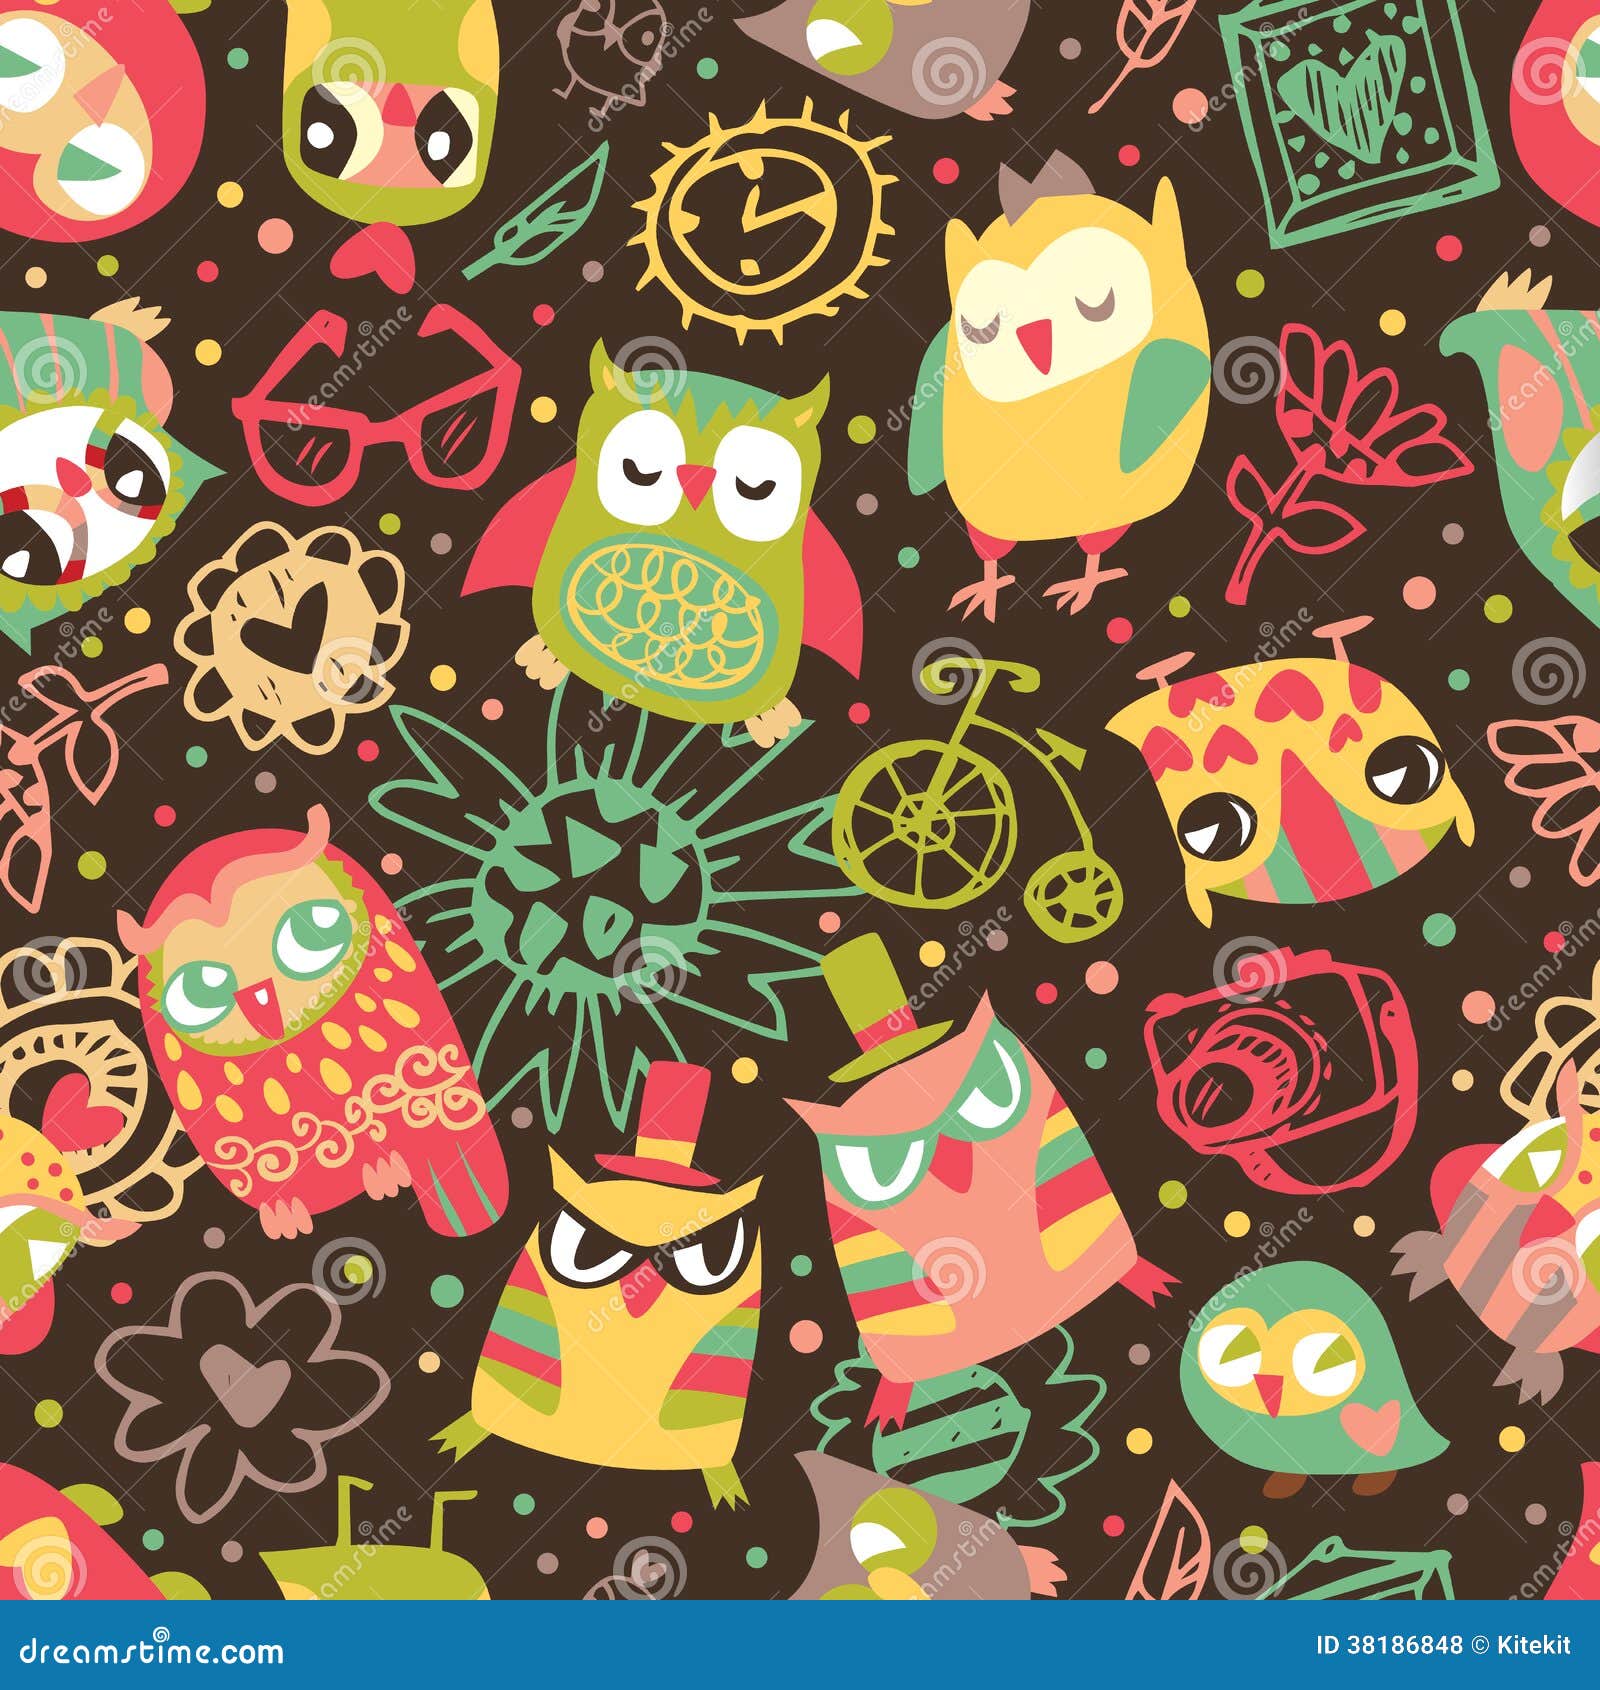 Data Cable Suitable for All Phones Christmas Vintage Seamless Background with Owls